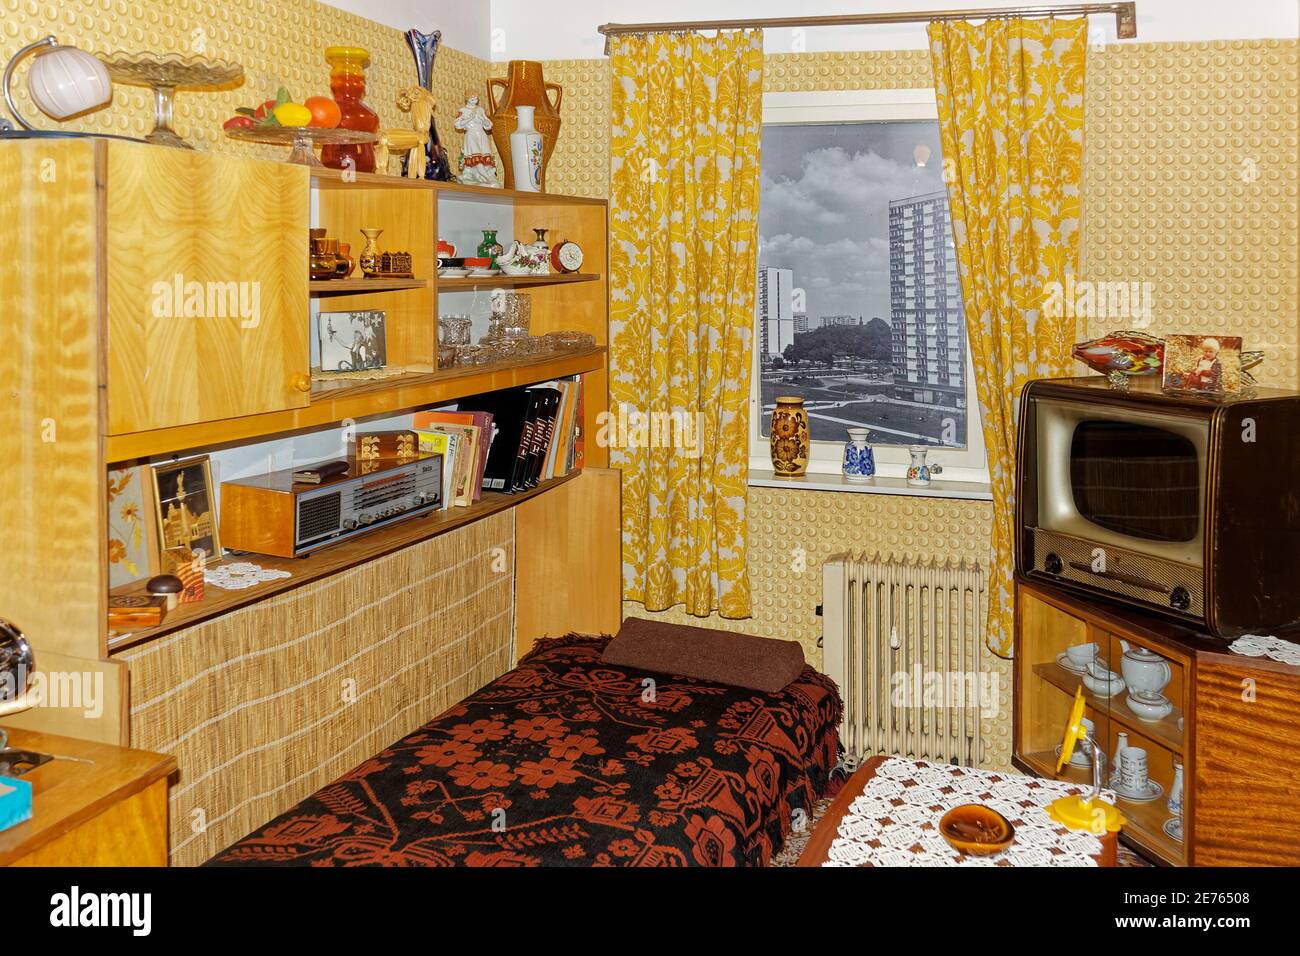 Warsaw, Poland - January 14, 2021. Living room from communism-era exhibited in Museum of Life under communism in Warsaw. Stock Photo